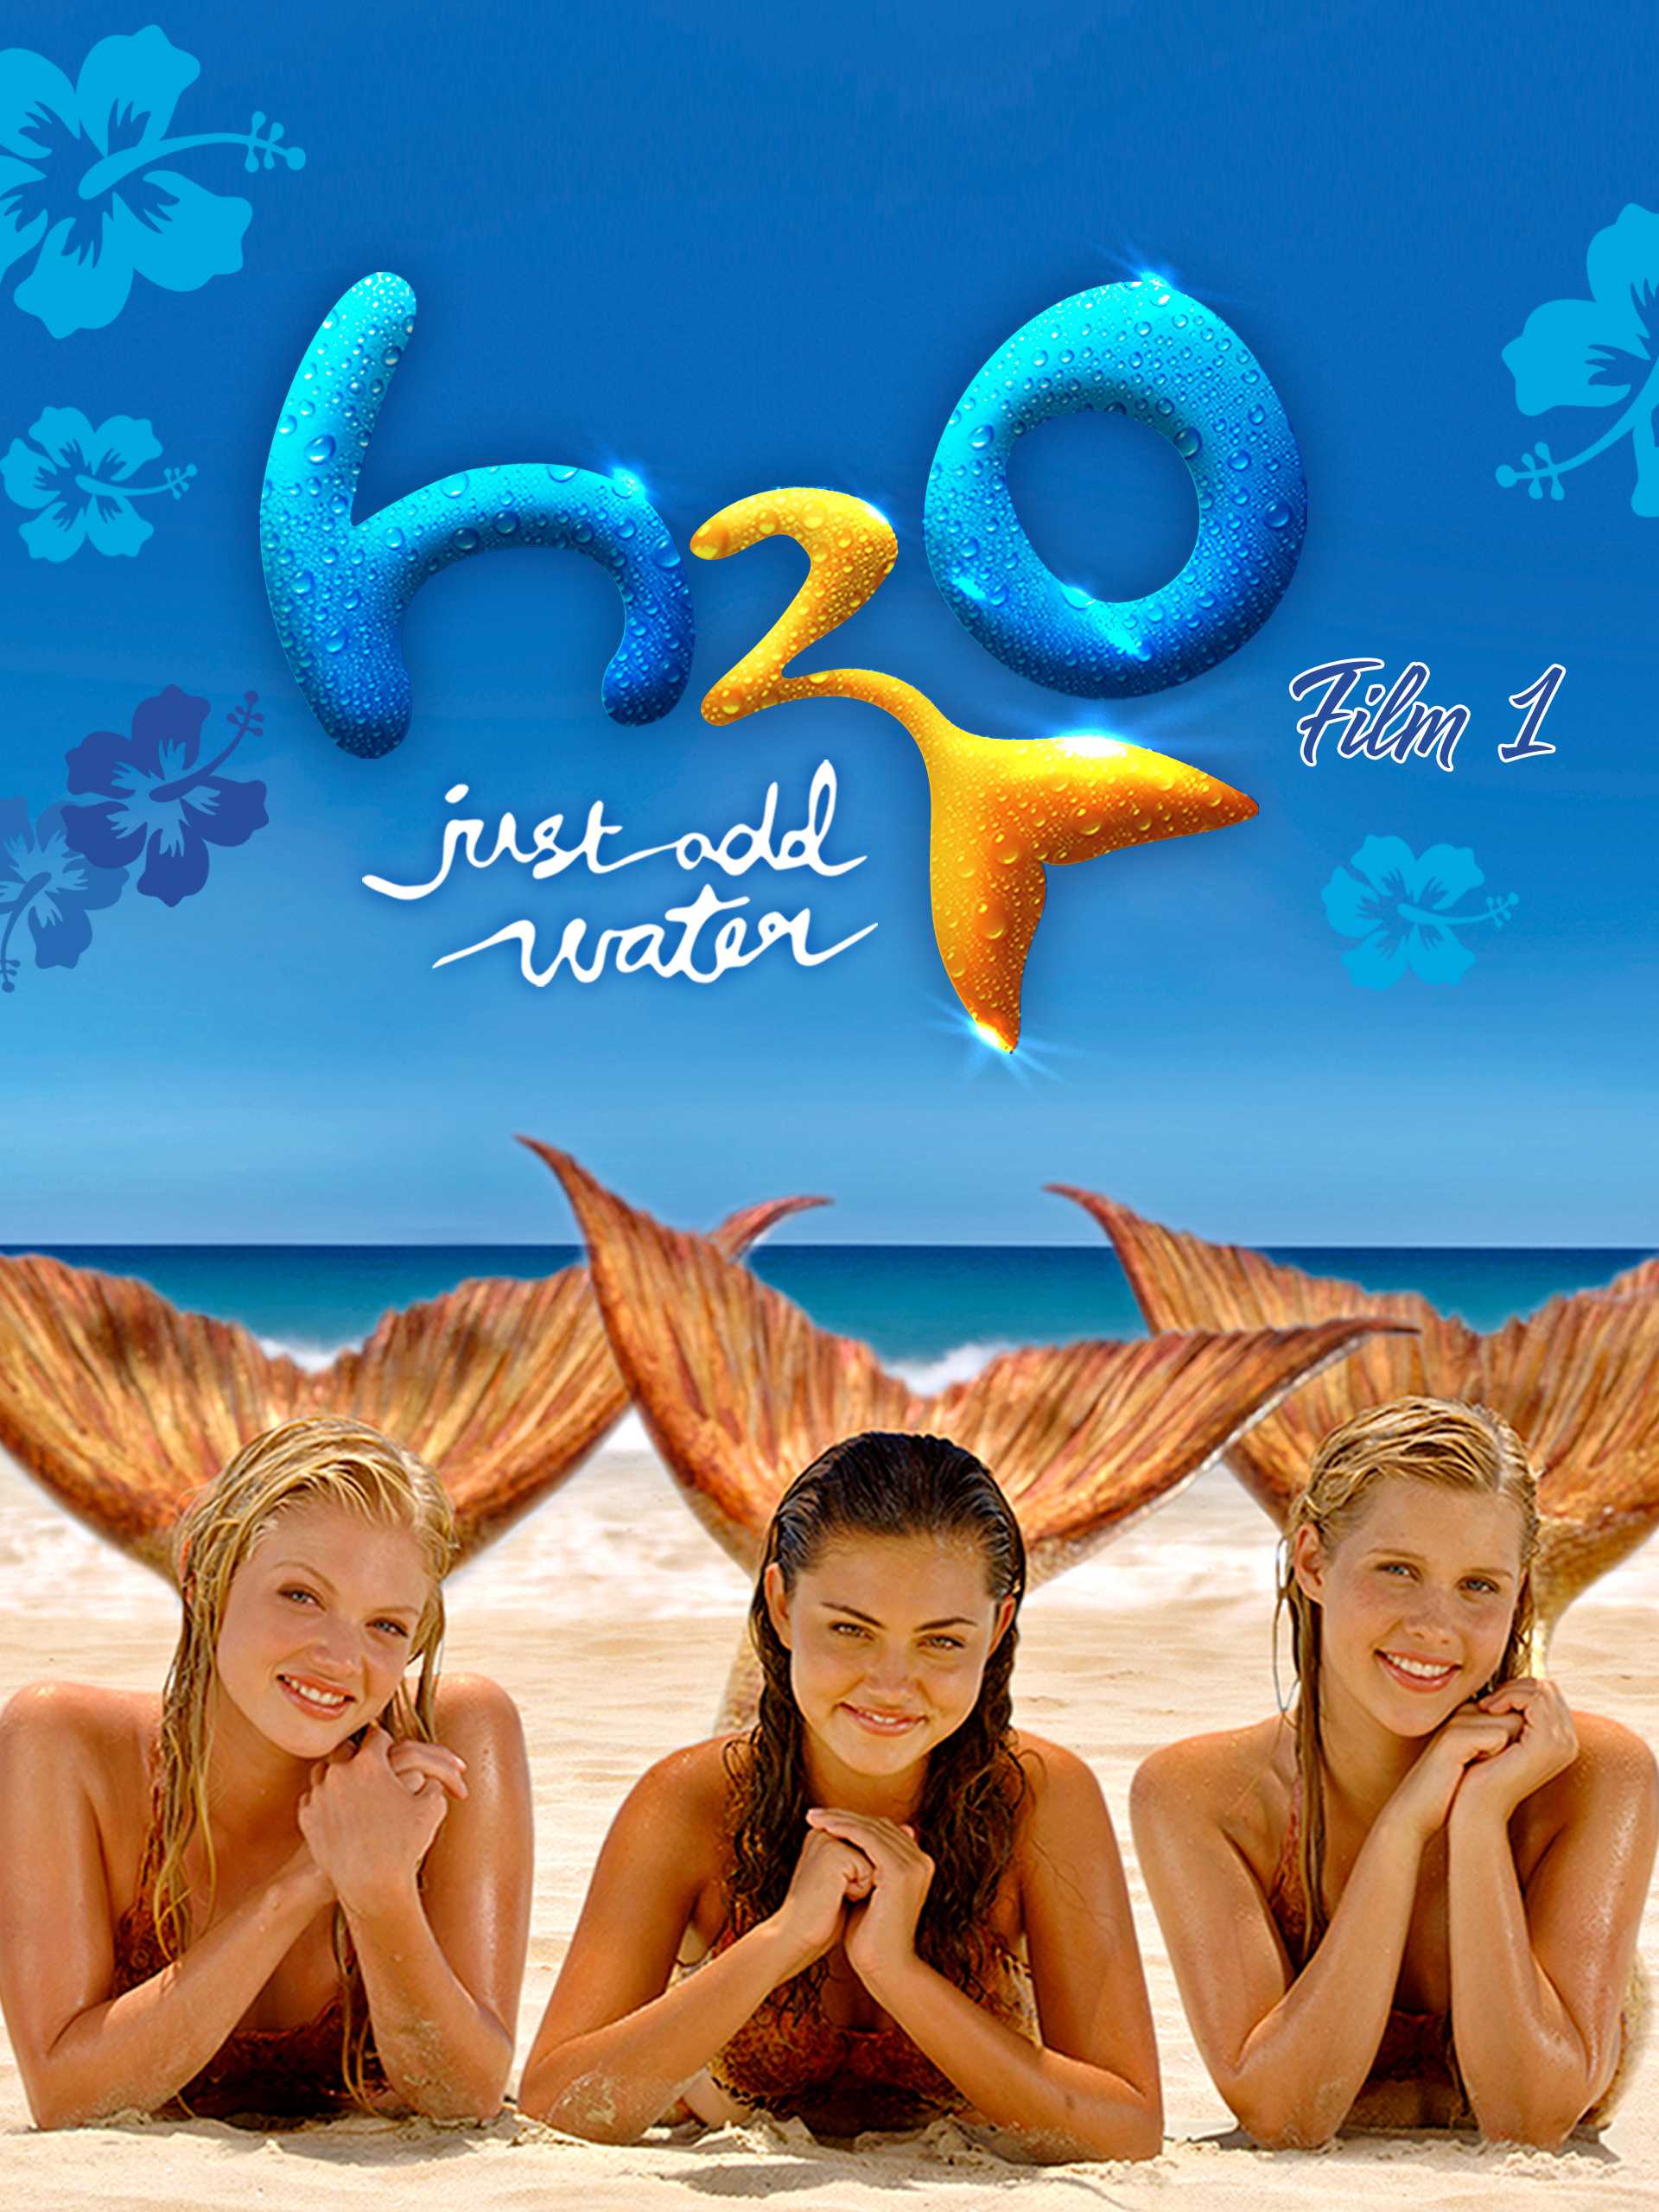 H2O - Just add Water Film 1 in streaming